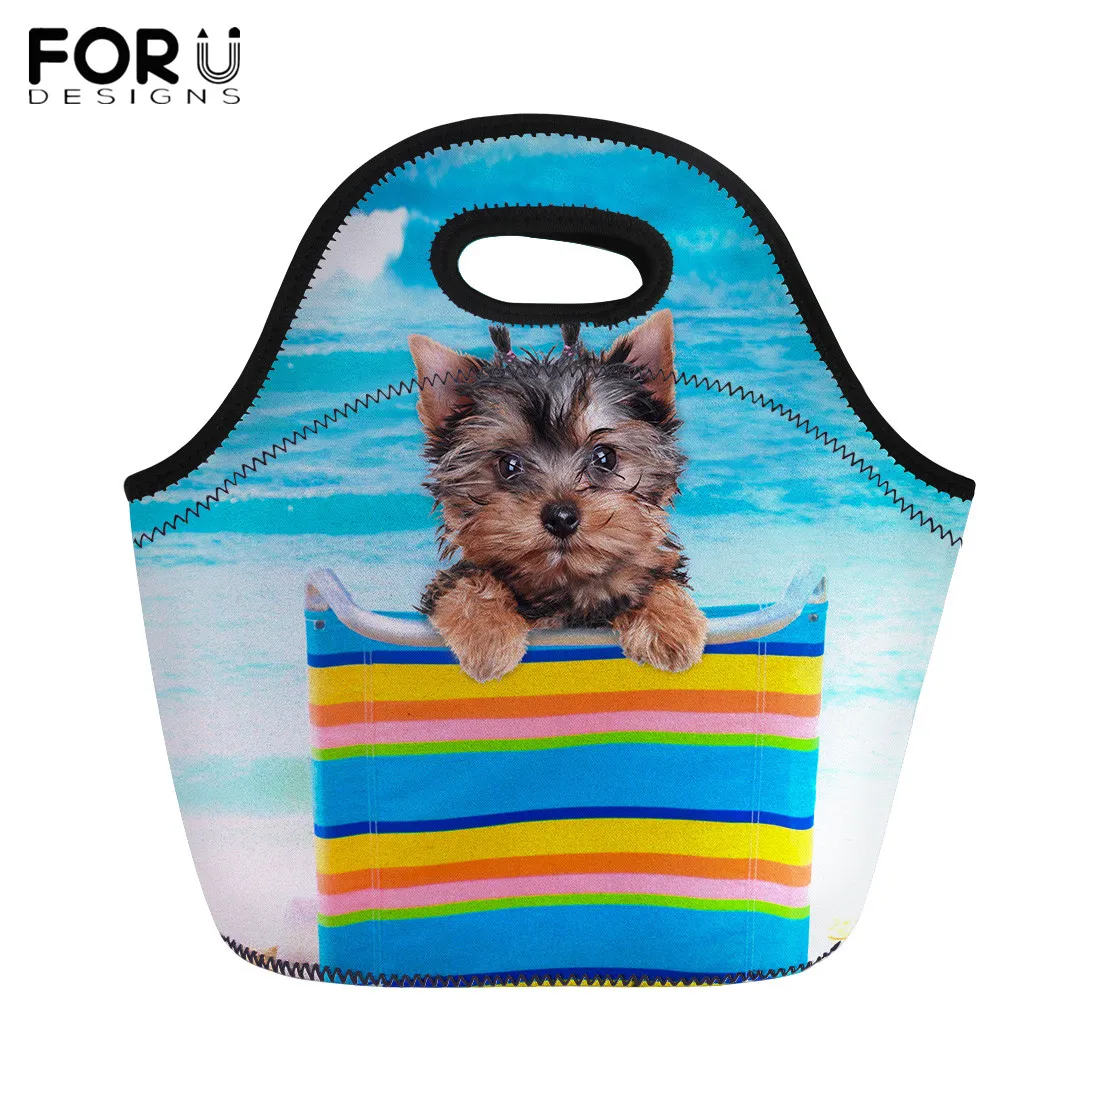 

FORUDESIGNS Cute Yorkshire Terrier Print Lunch Bag for Boy Girls School Meal Bag Personality Lunch Box Picnic Keep Warm Food Bag